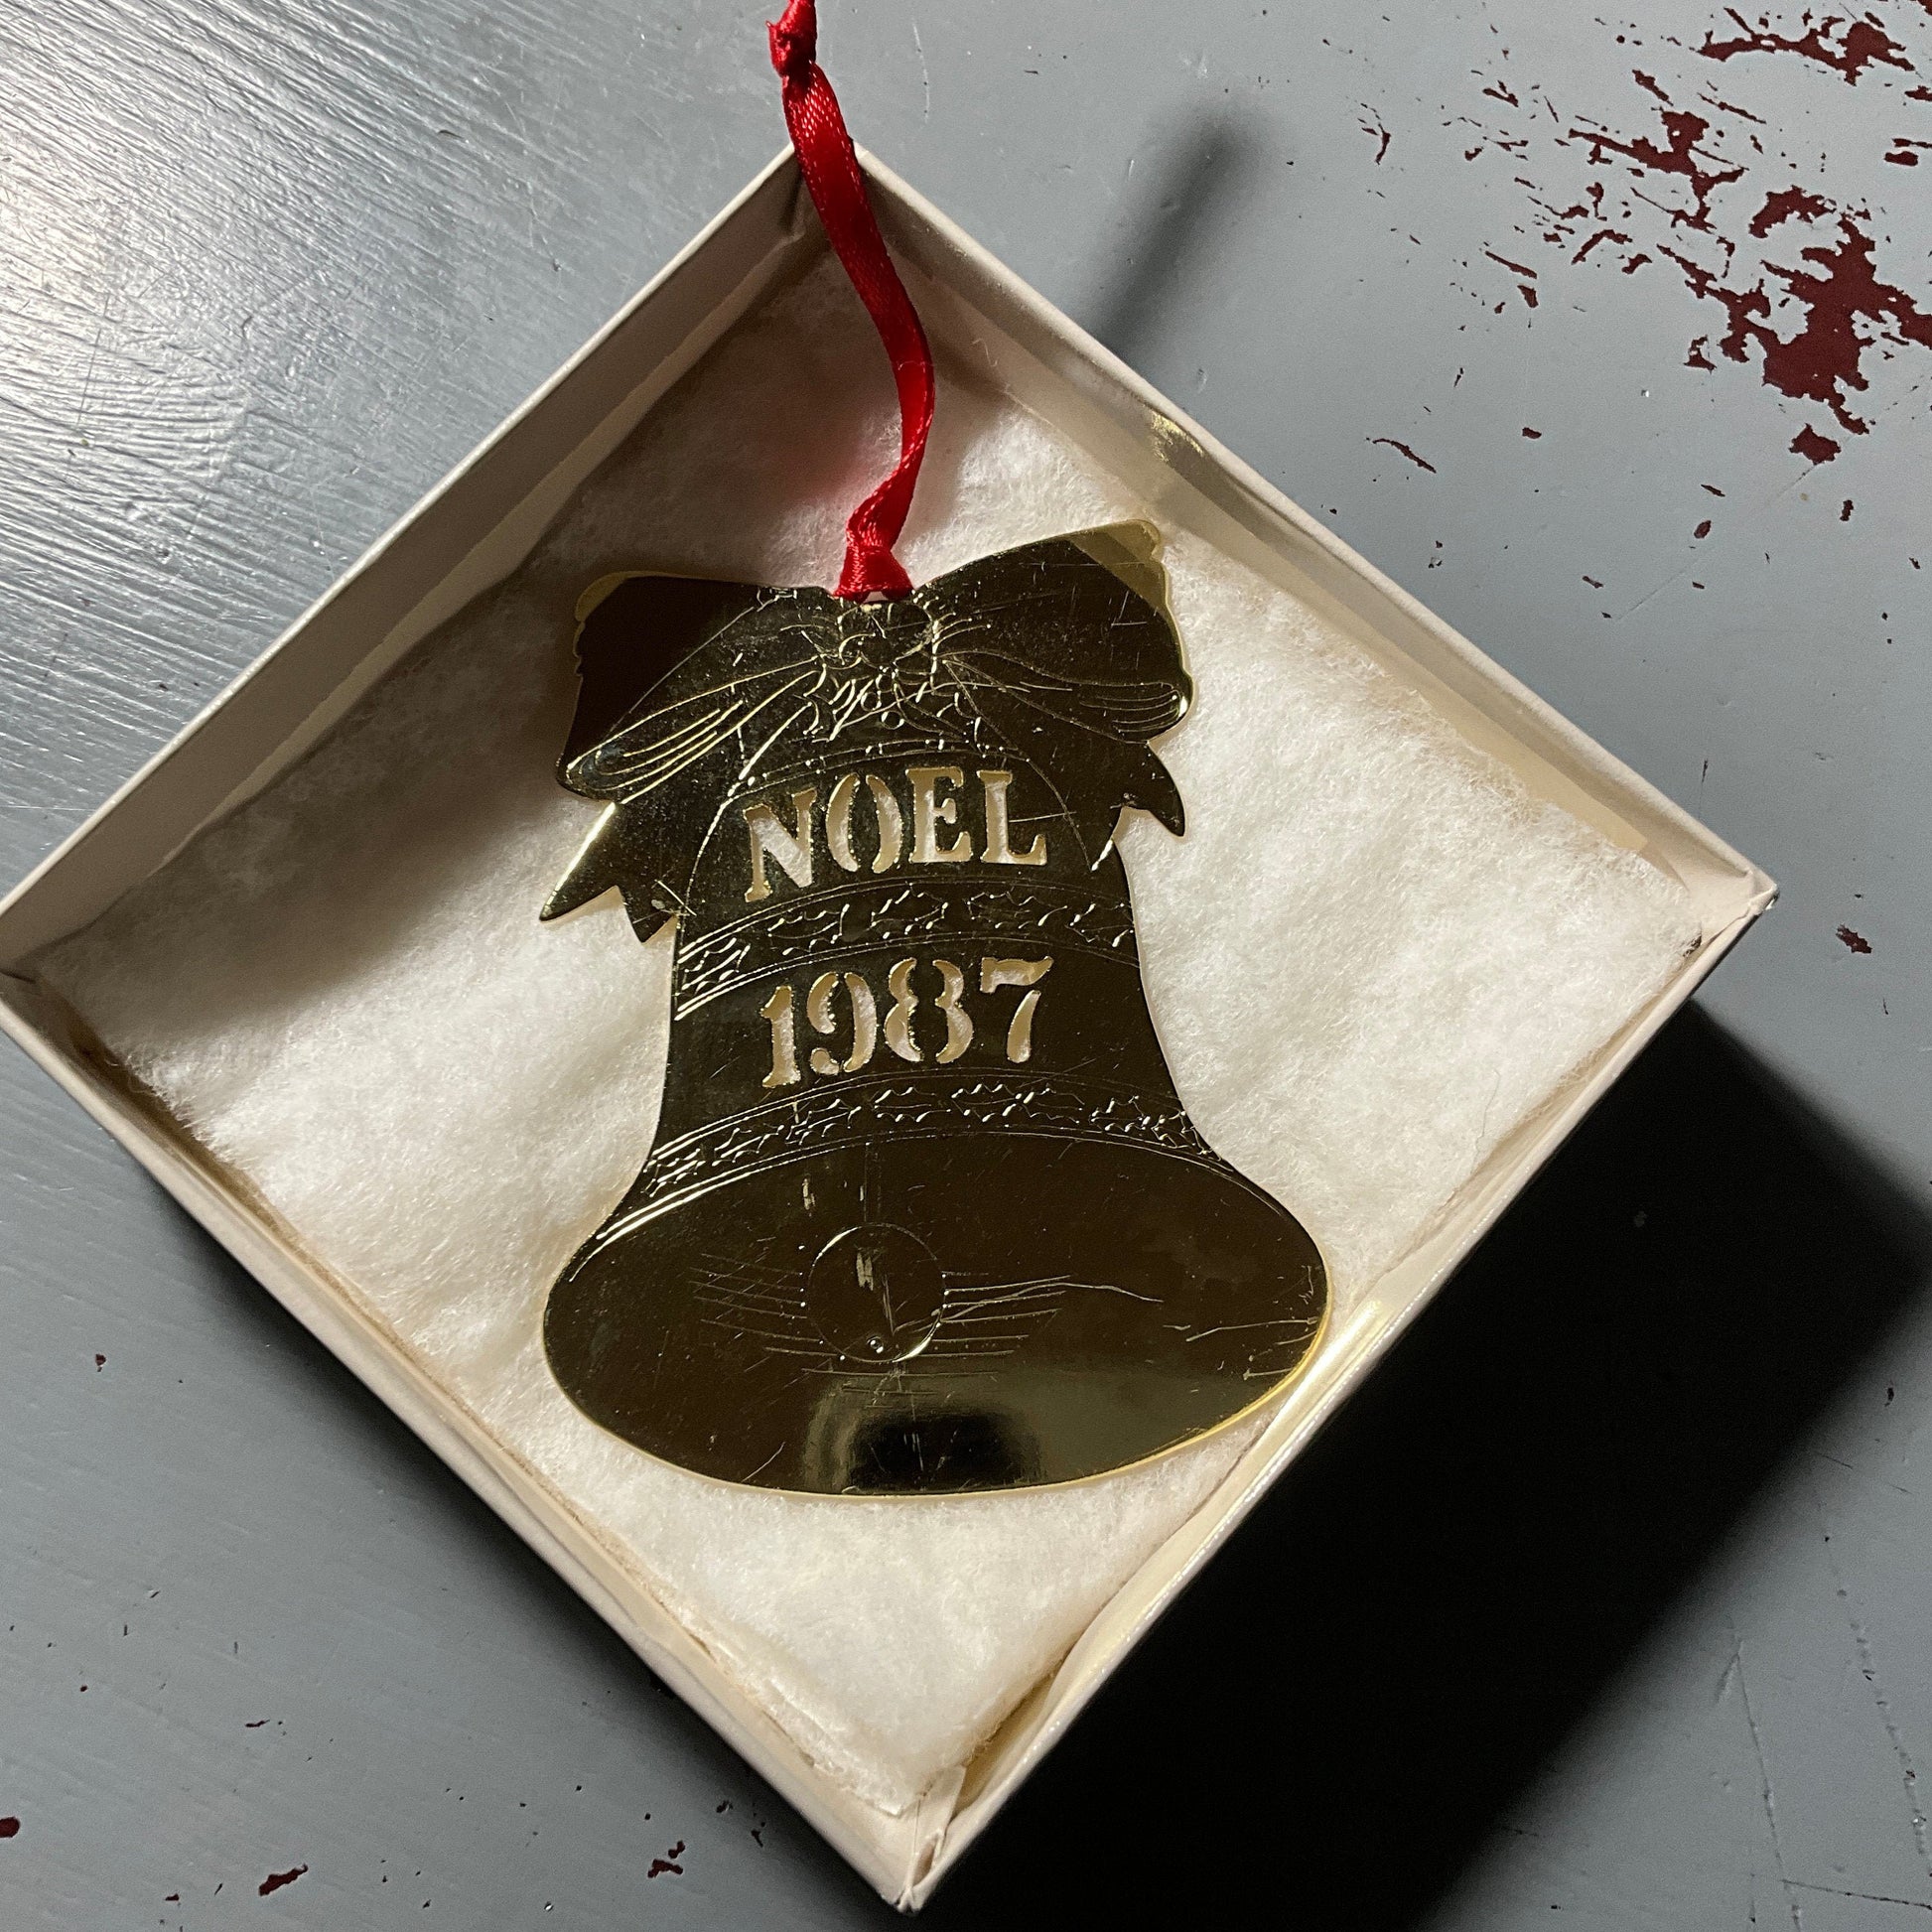 NOEL Gold Christmas Bell Dated 1987 collectible brass ornament